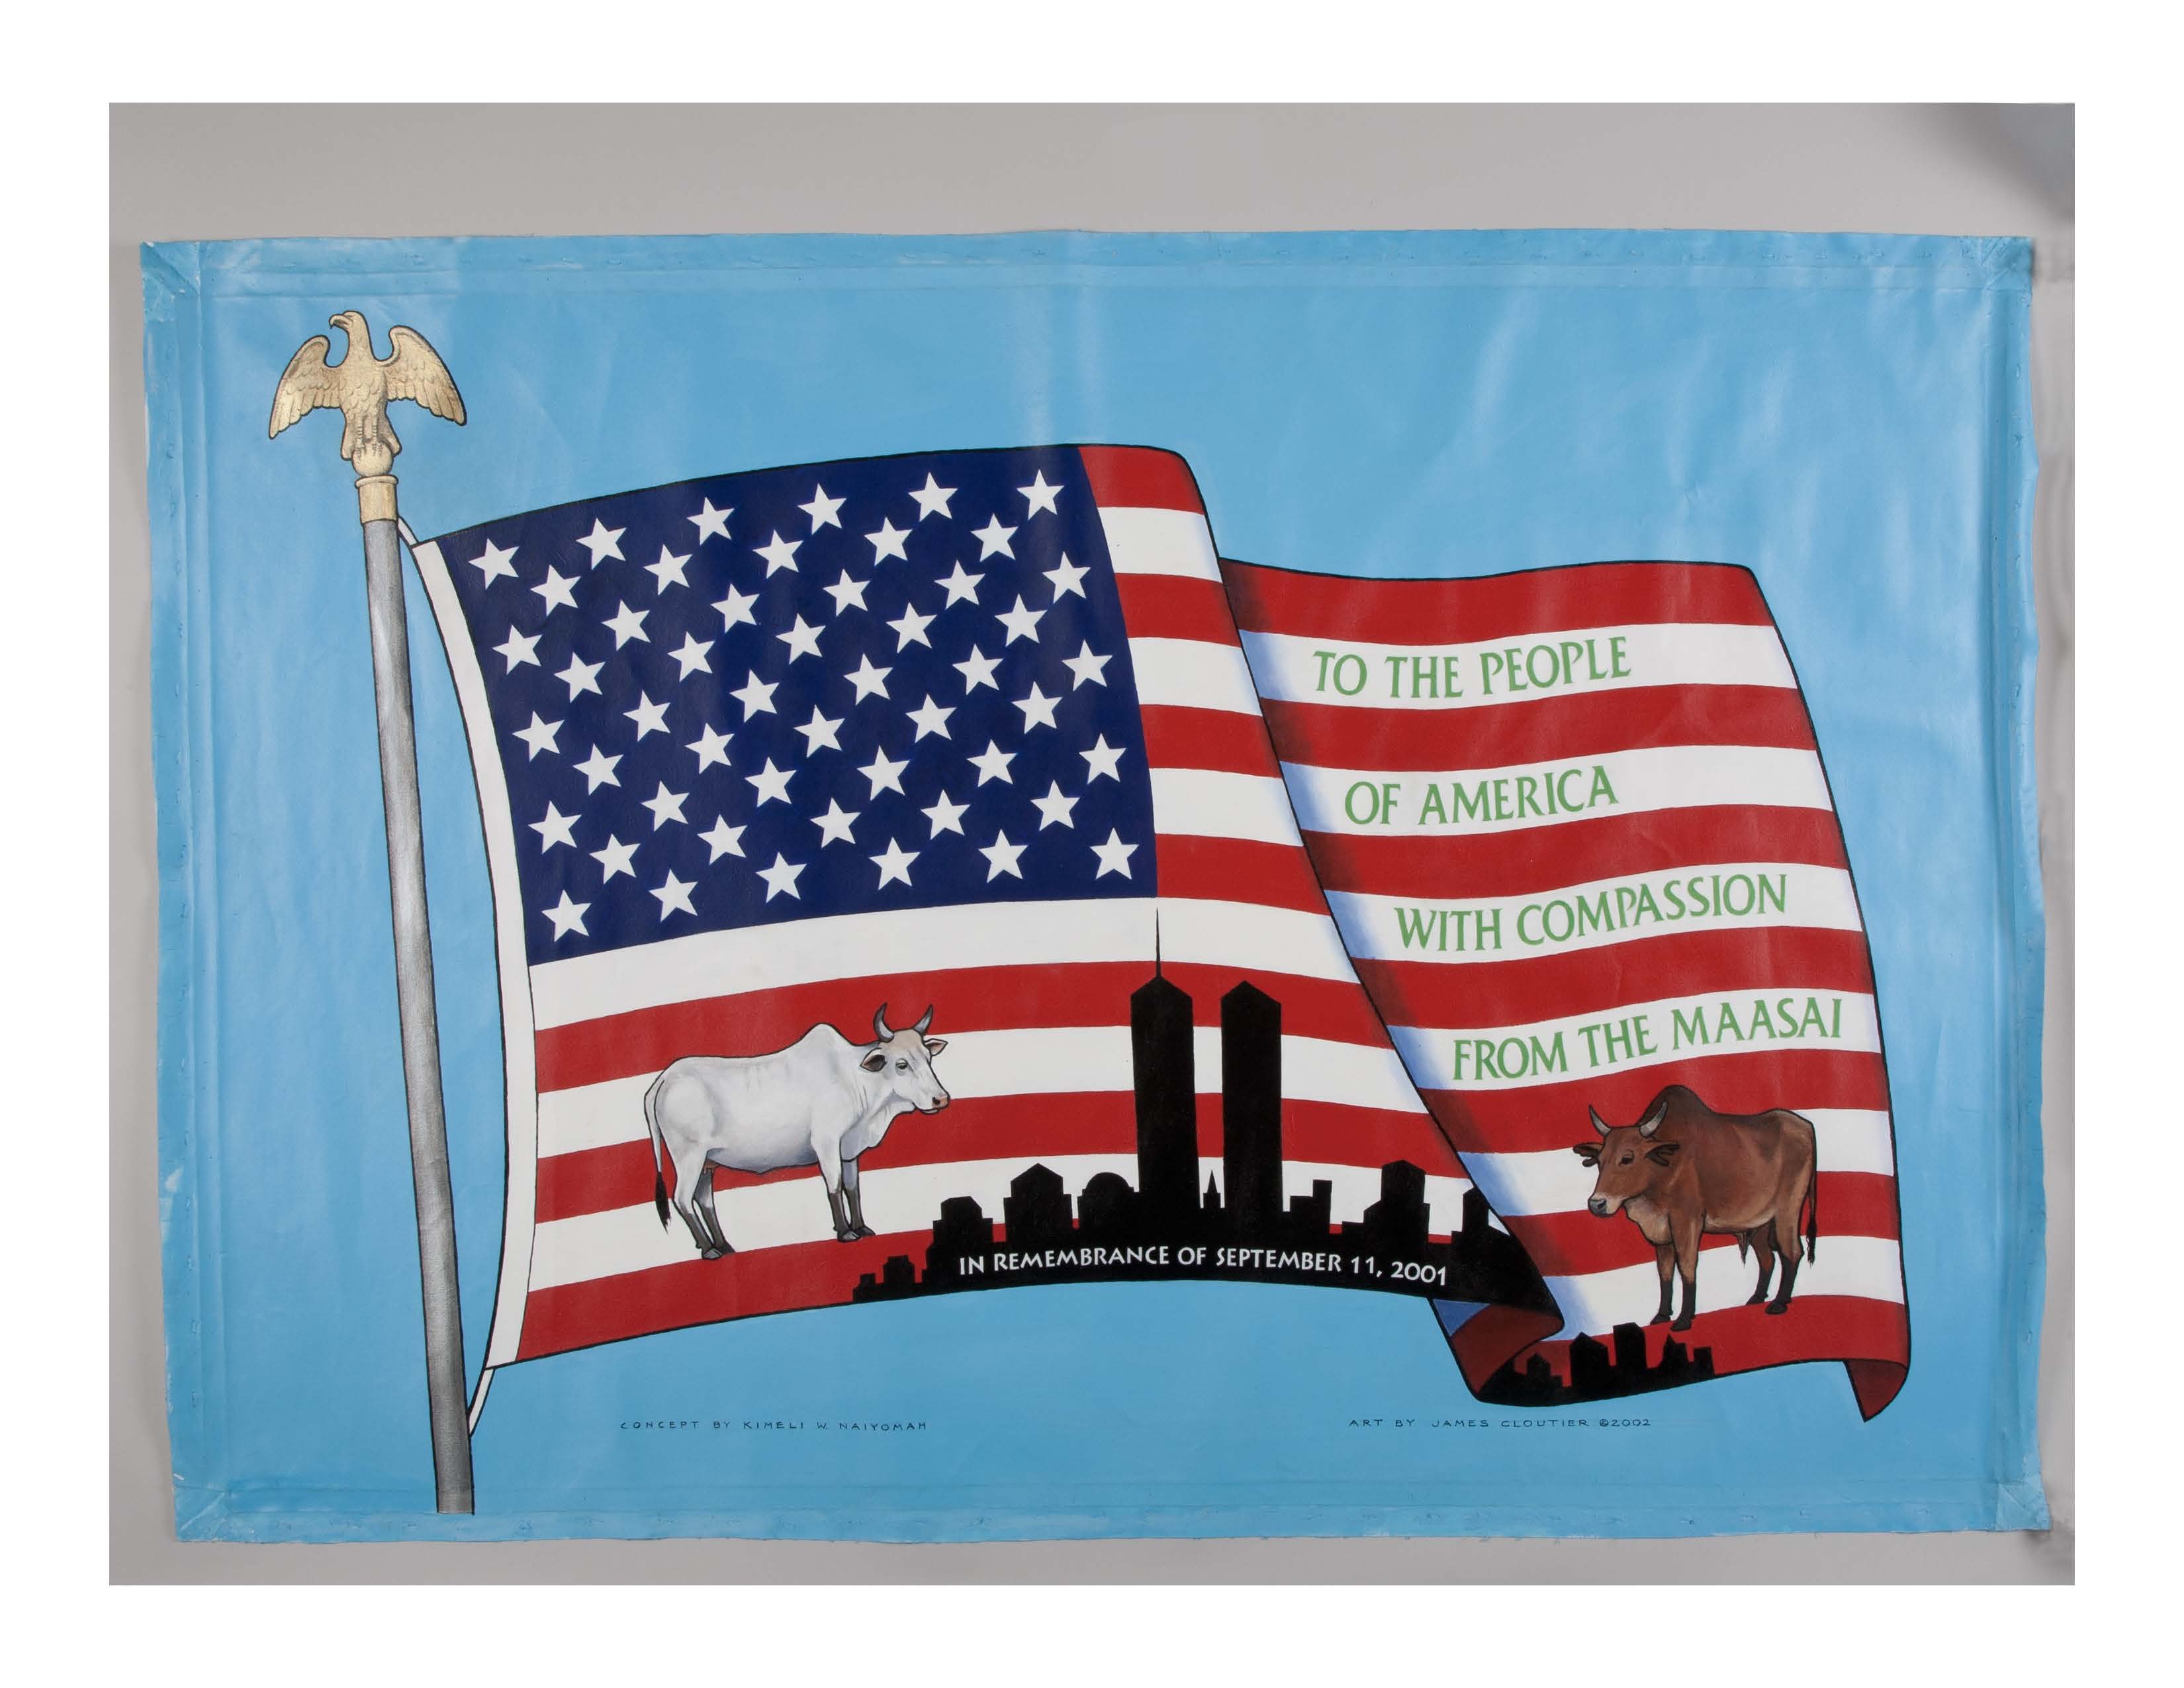 An illustrated American flag is adorned with the skyline of New York and two cows, plus a message of support for the people of America.